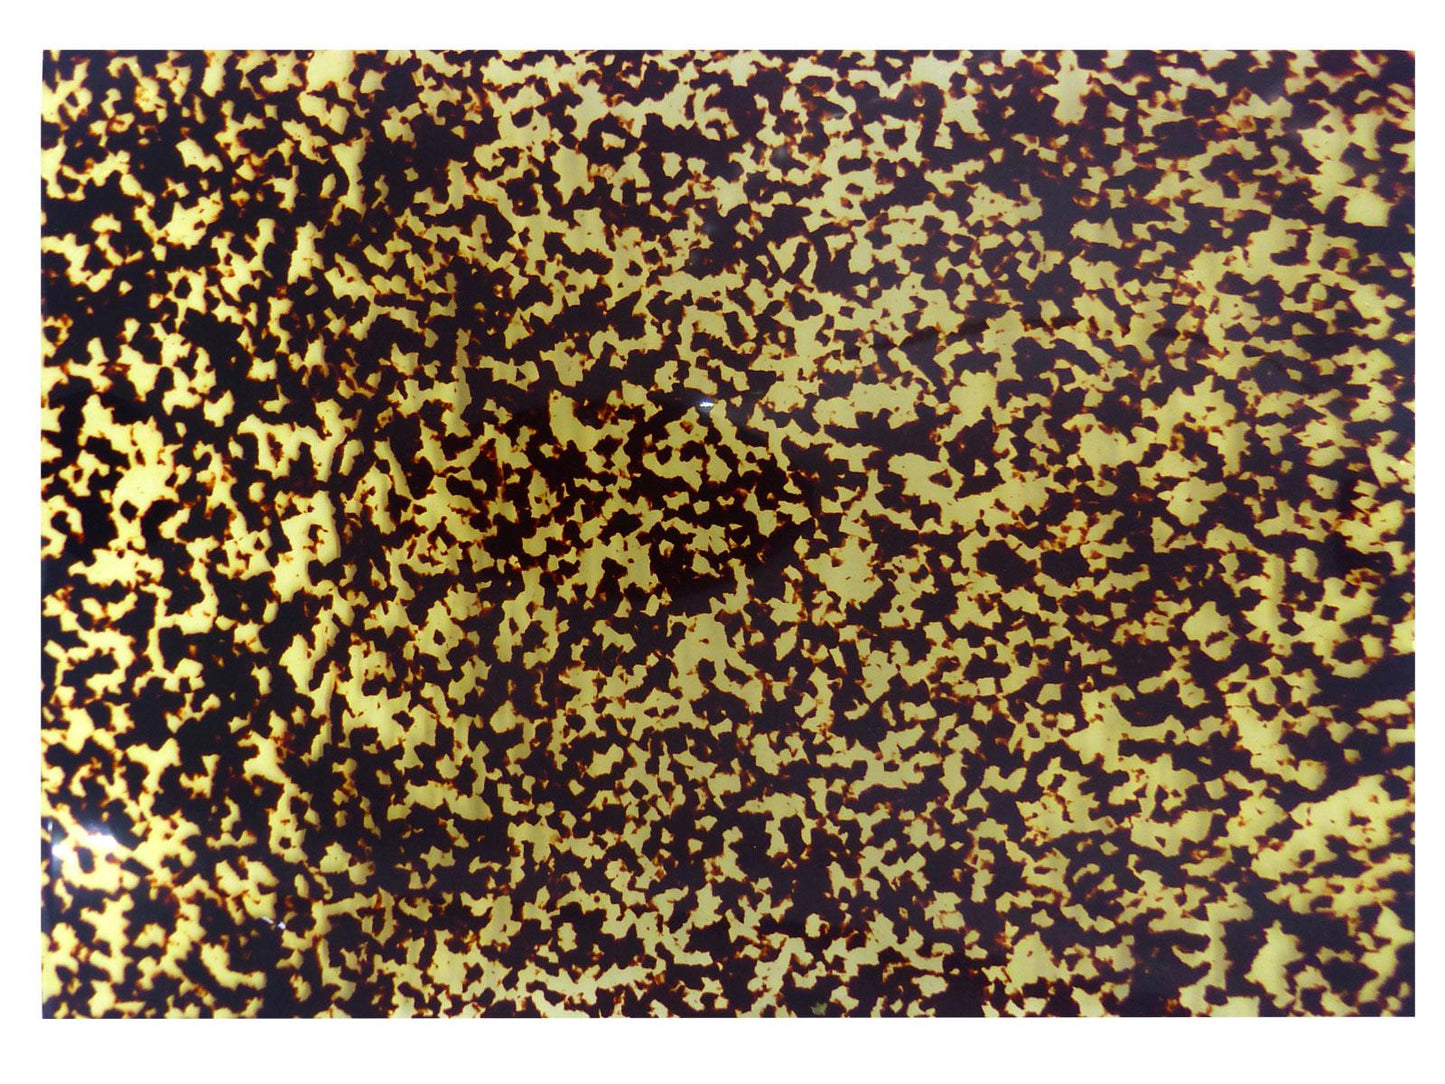 Incudo Vintage Spotted Tortoiseshell Celluloid Sheet - 430x290x0.8mm (16.9x11.42x0.03")